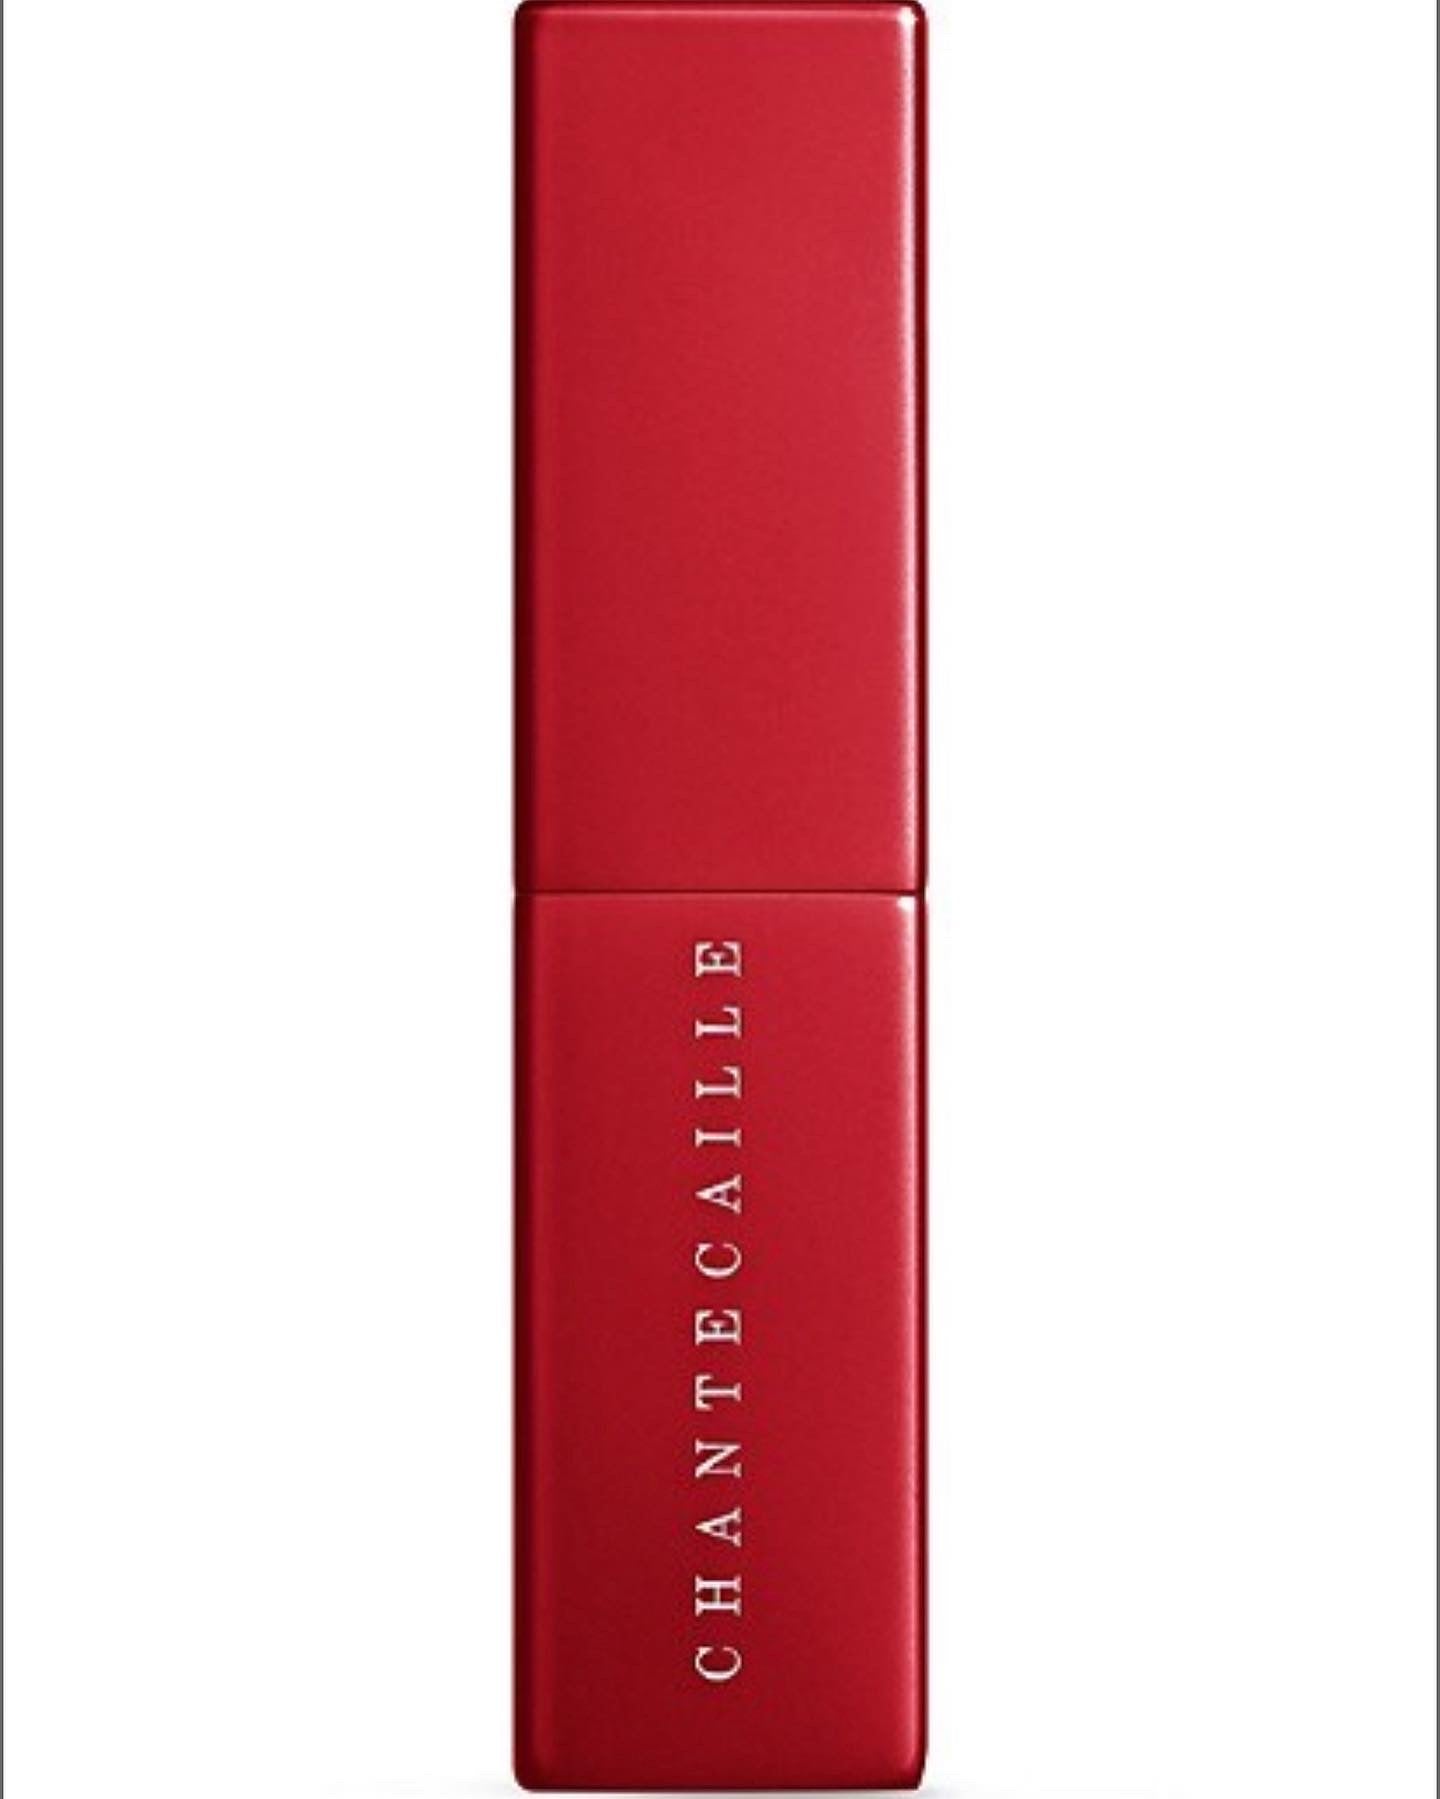 CHANTECAILLE, LIMITED EDITION YEAR OF THE TIGER RUBY LIP VEIL